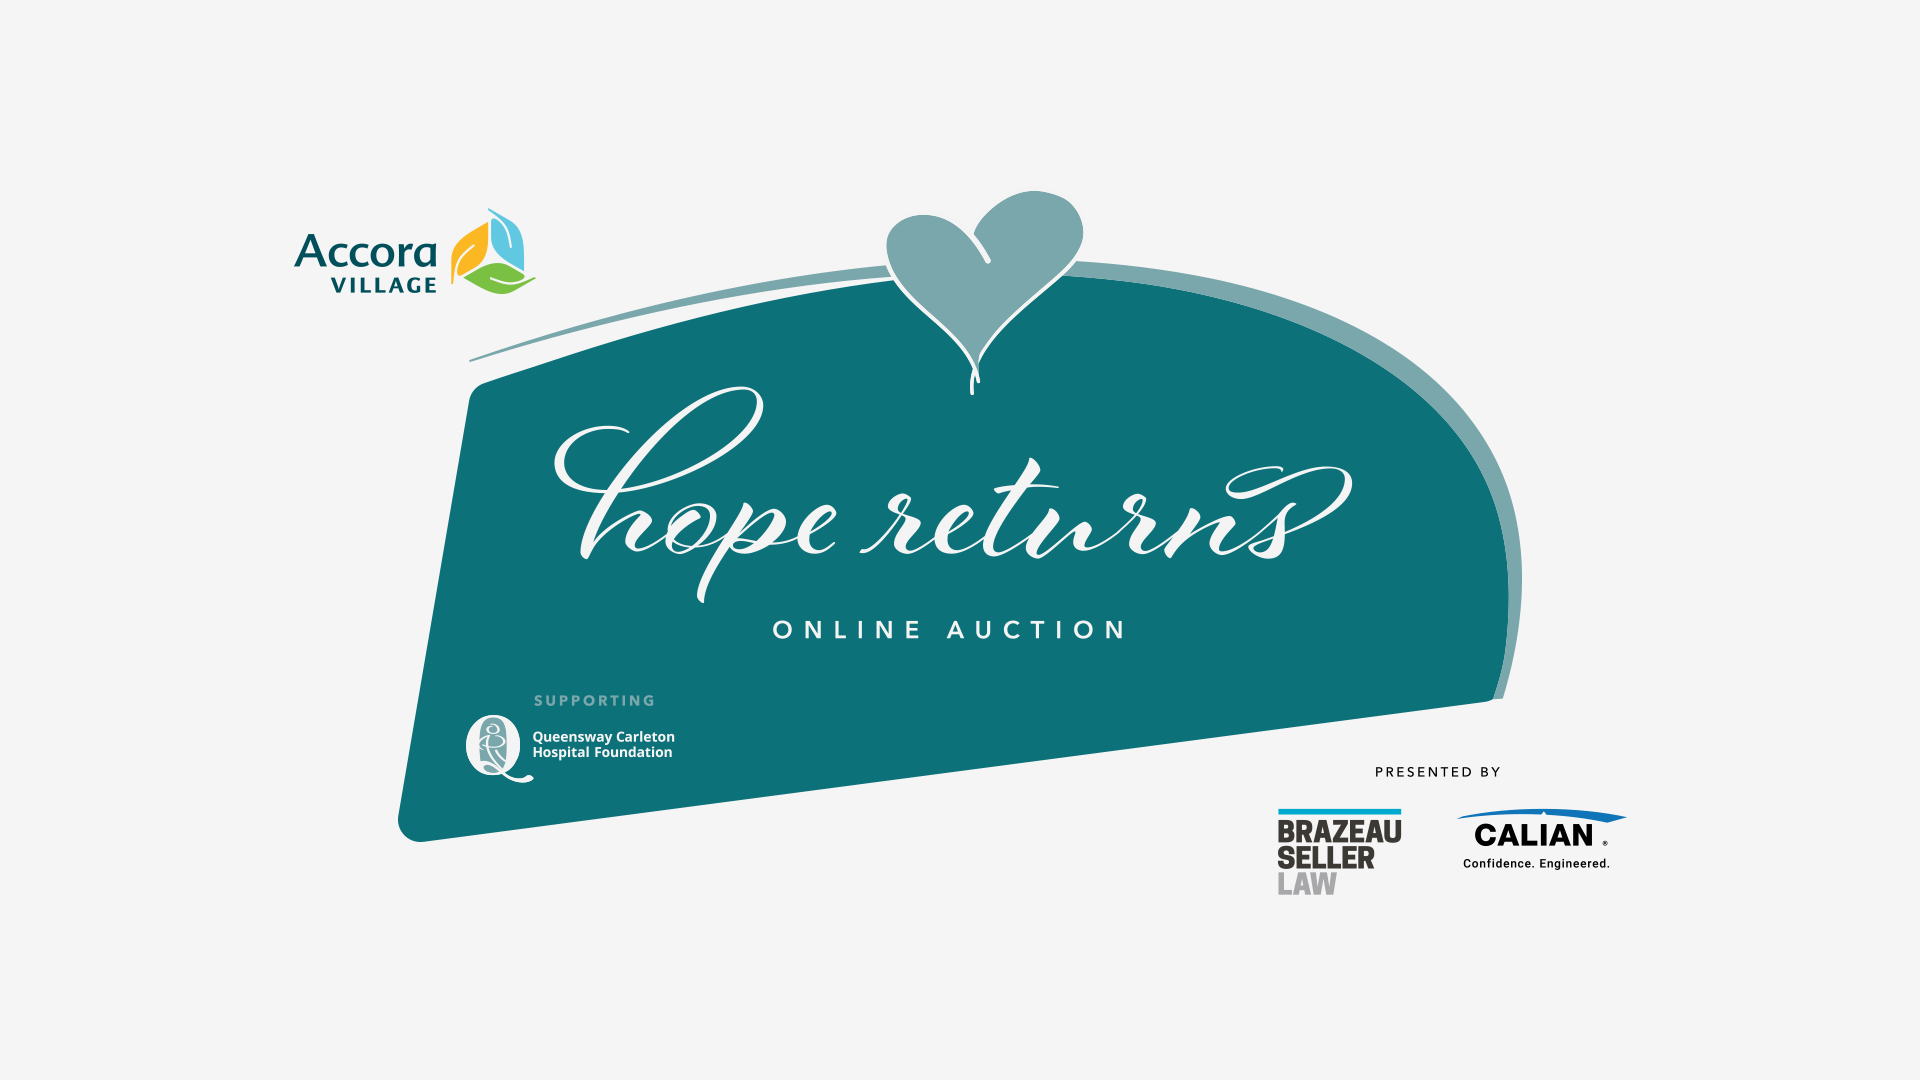 Hope Returns Campaign by Queensway Carlton Hospital Foundation Ottawa